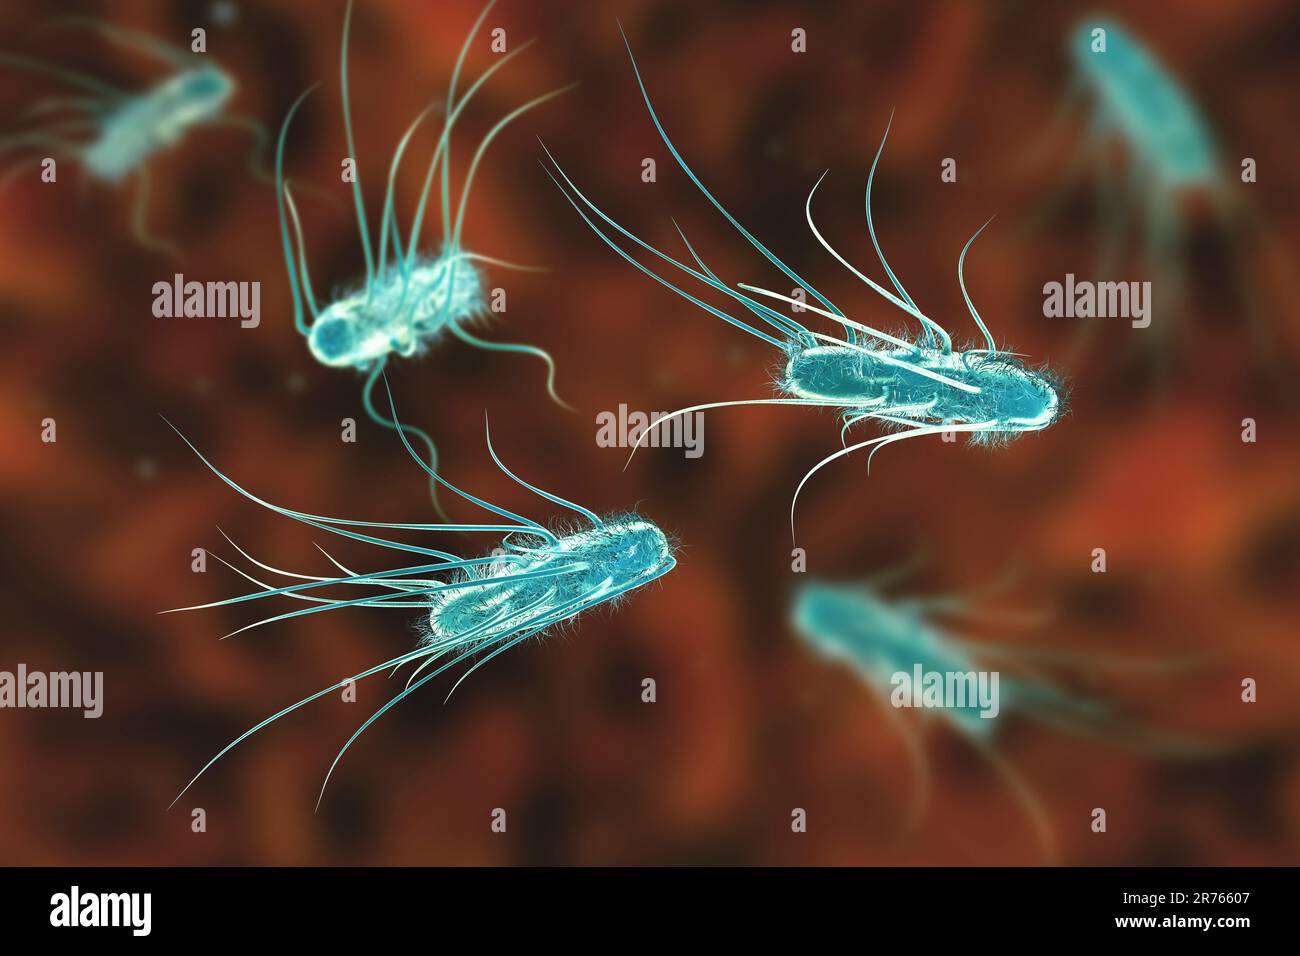 Escherichia coli bacteria, computer illustration. E. coli is a rod- shaped bacterium (bacillus). Its cell membrane is covered in fine filaments called Stock Photo